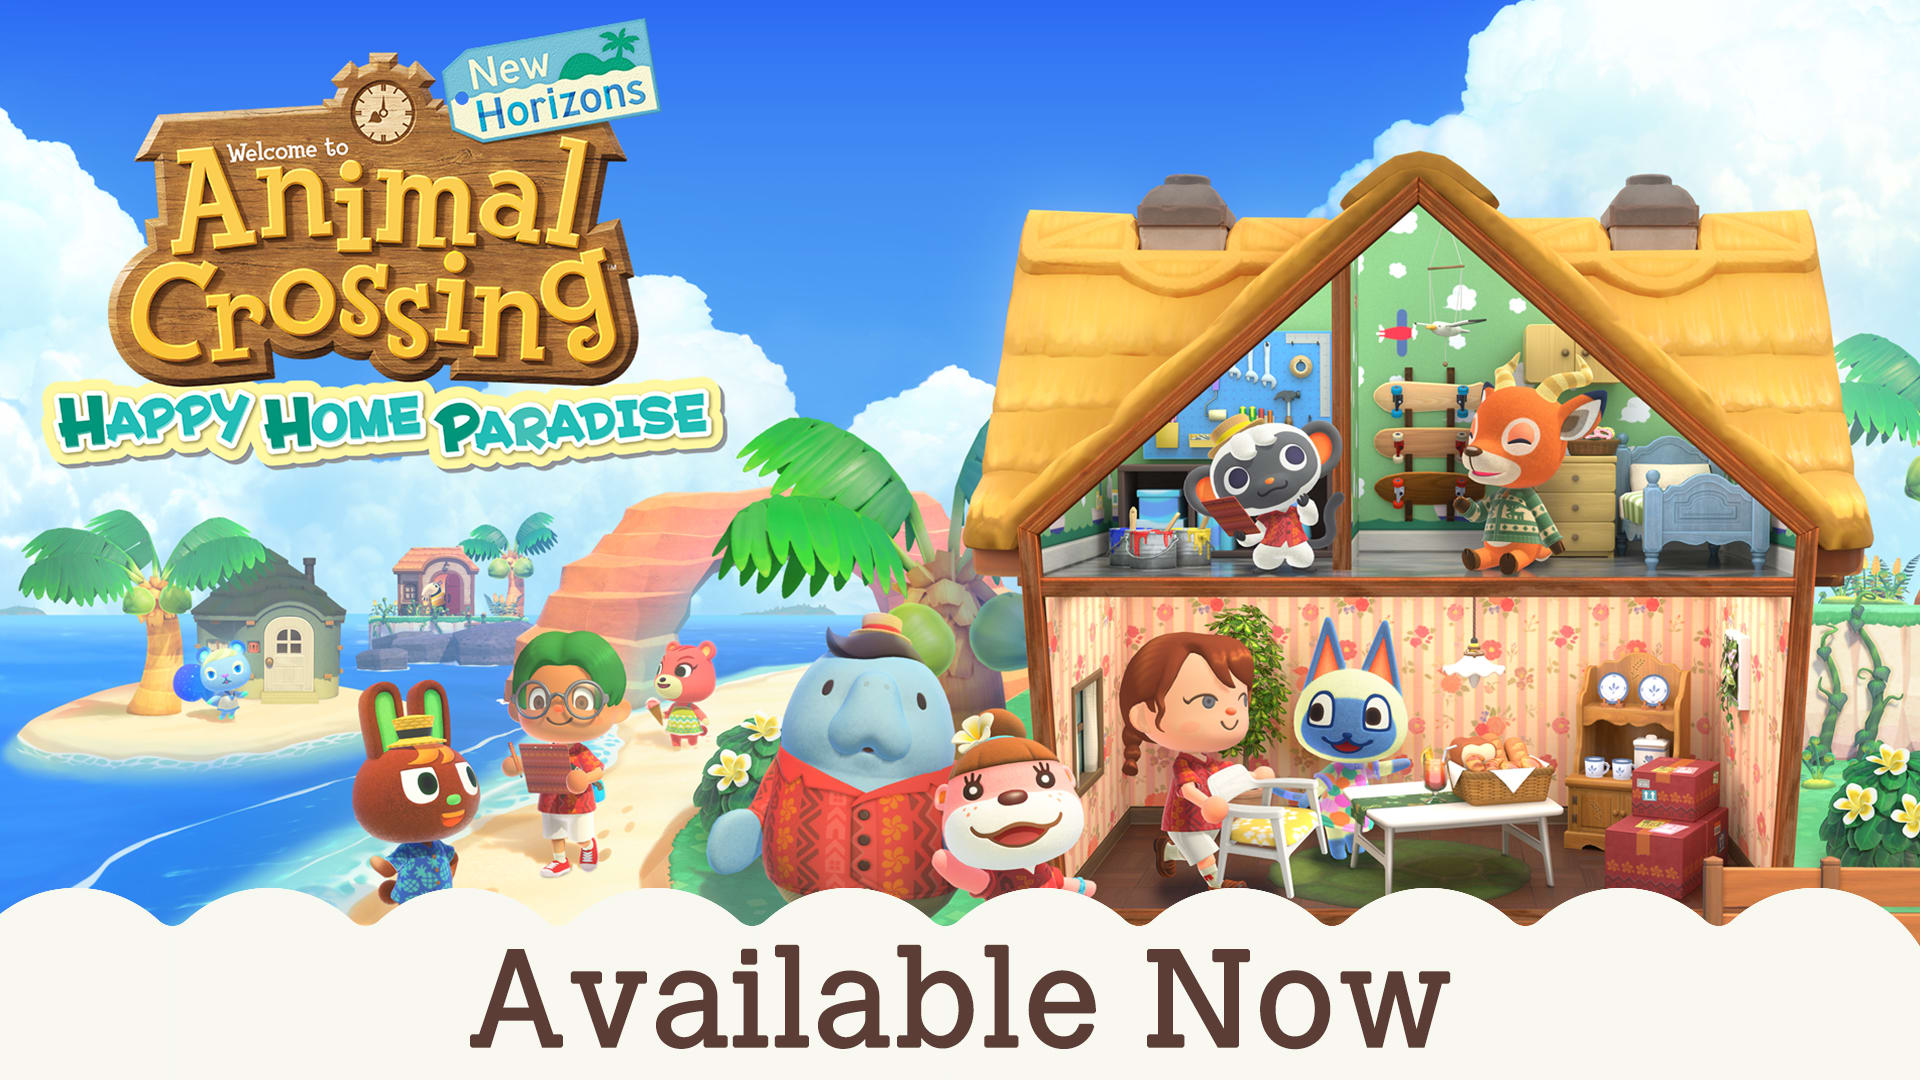 New DLC! Expand your horizons with the Animal Crossing New Horizons